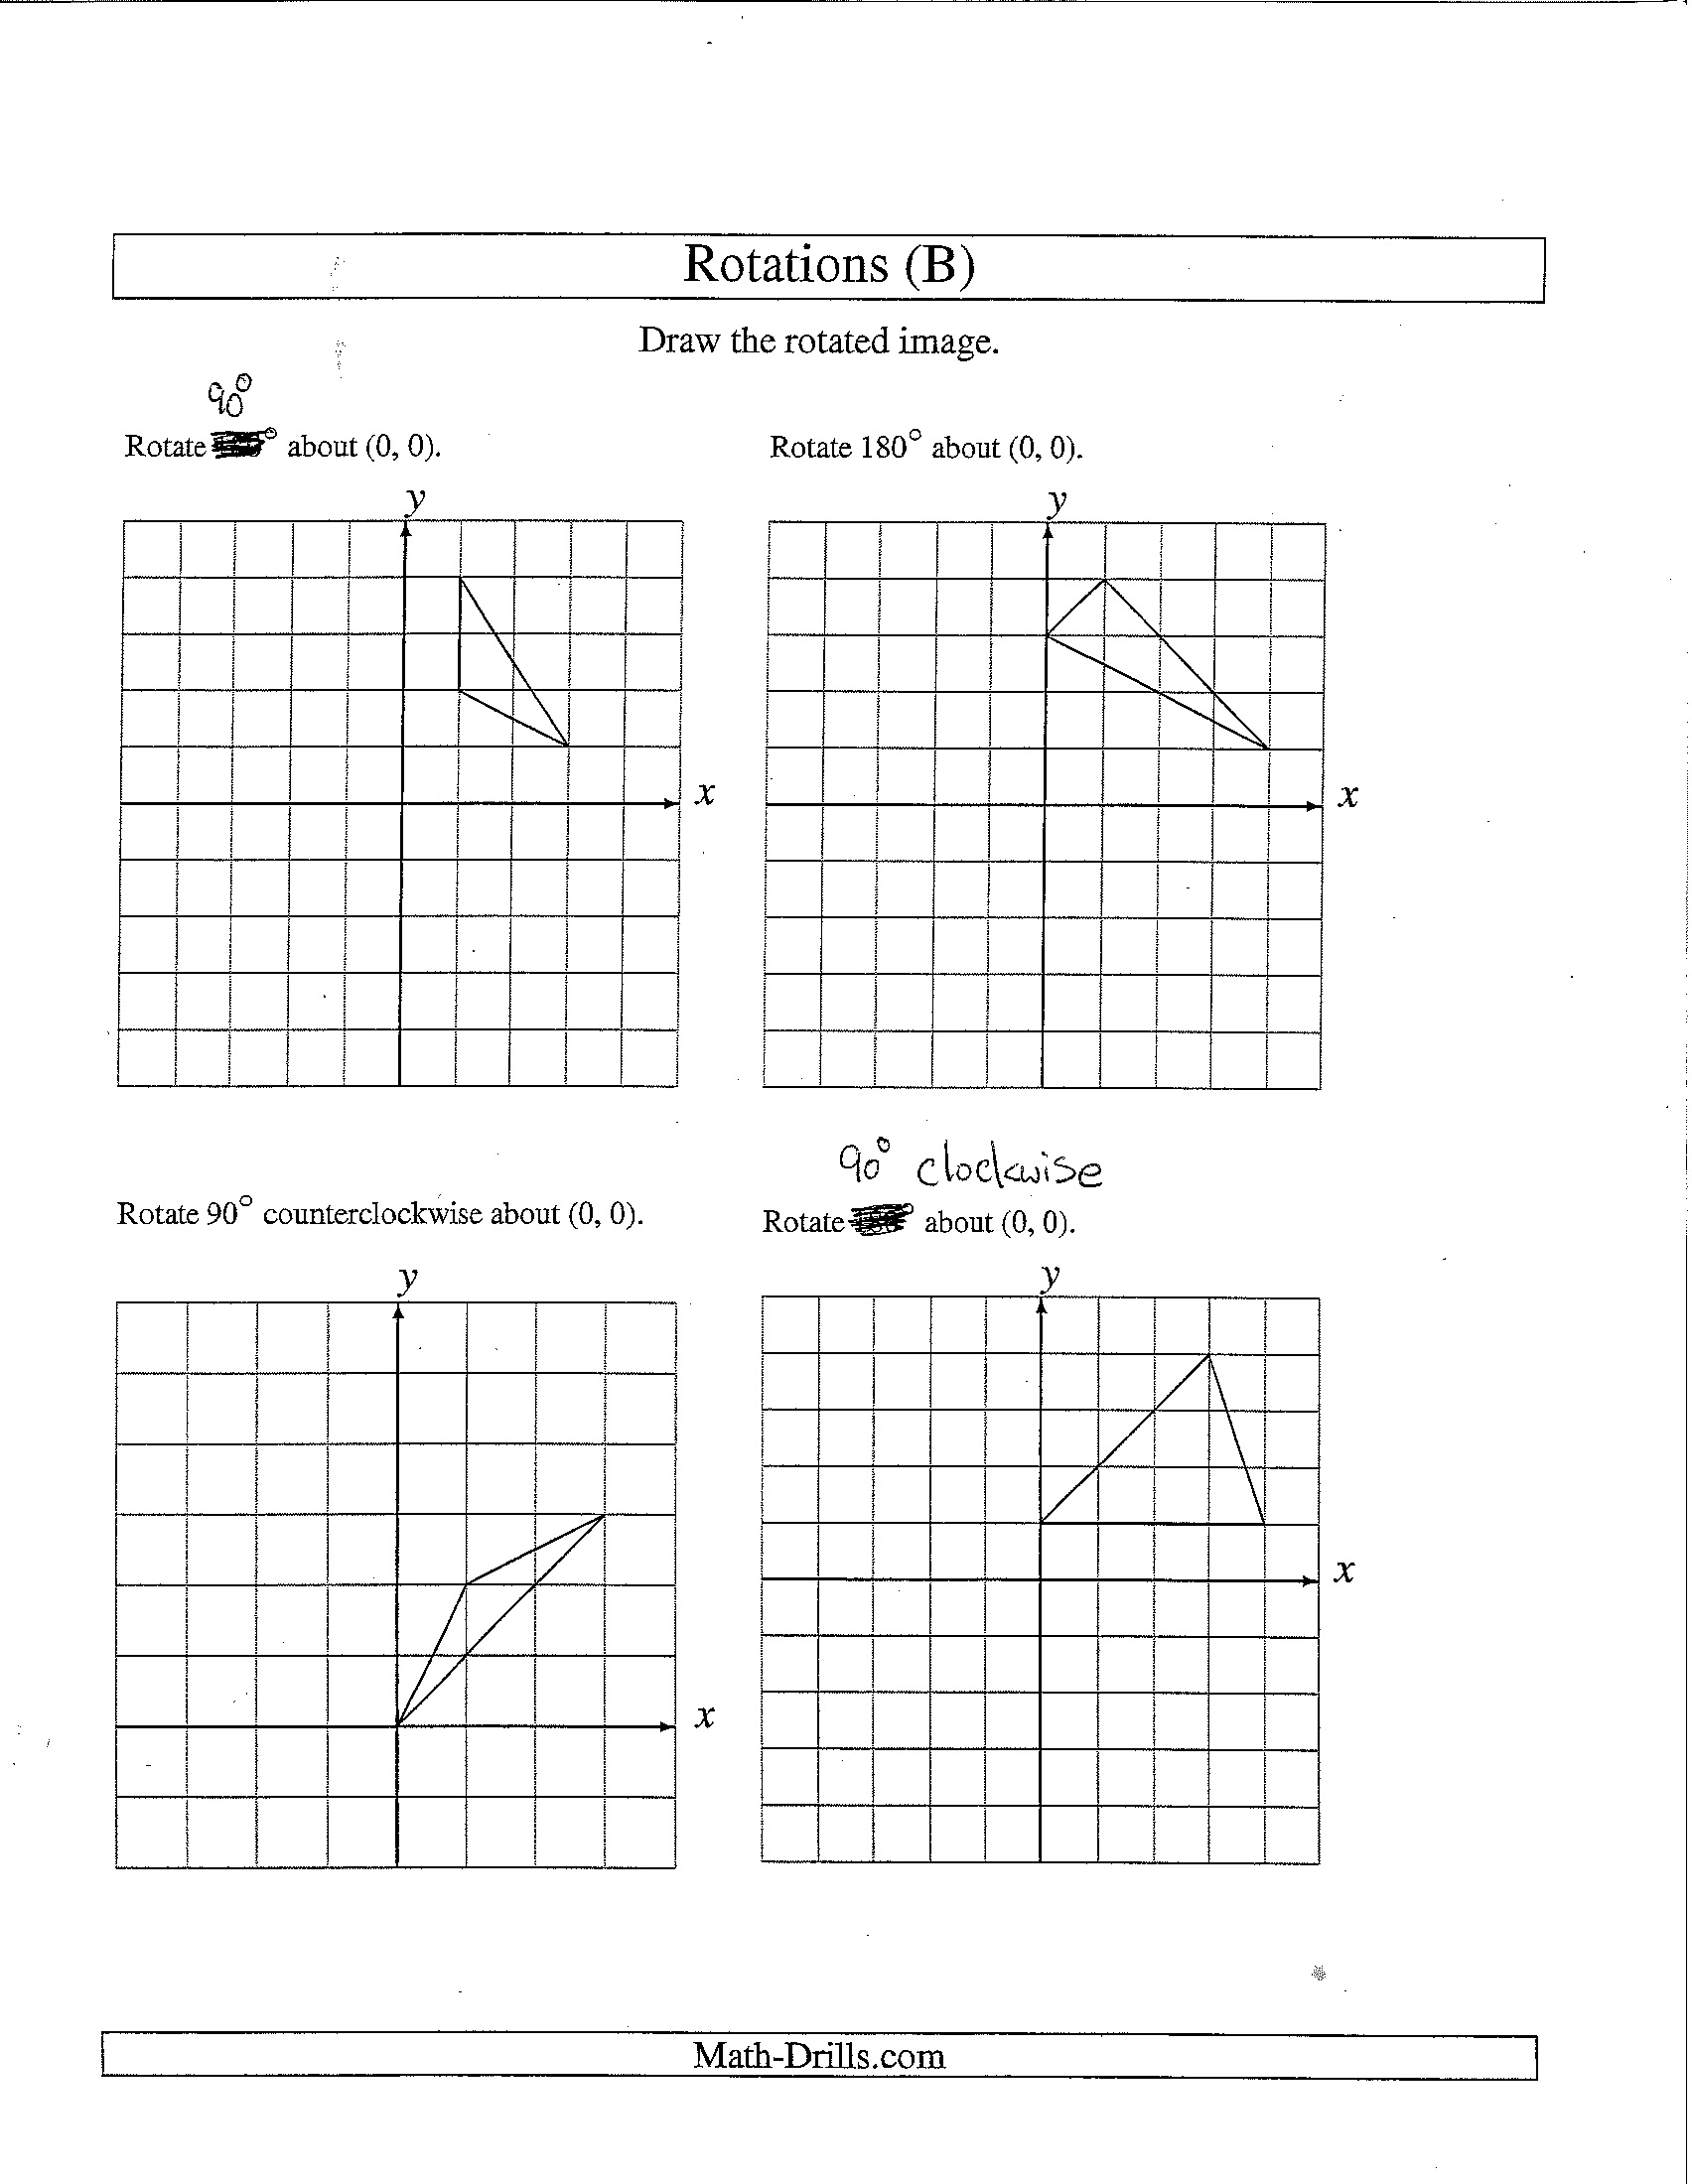 16-best-images-of-rotations-worksheet-8th-grade-geometry-rotations